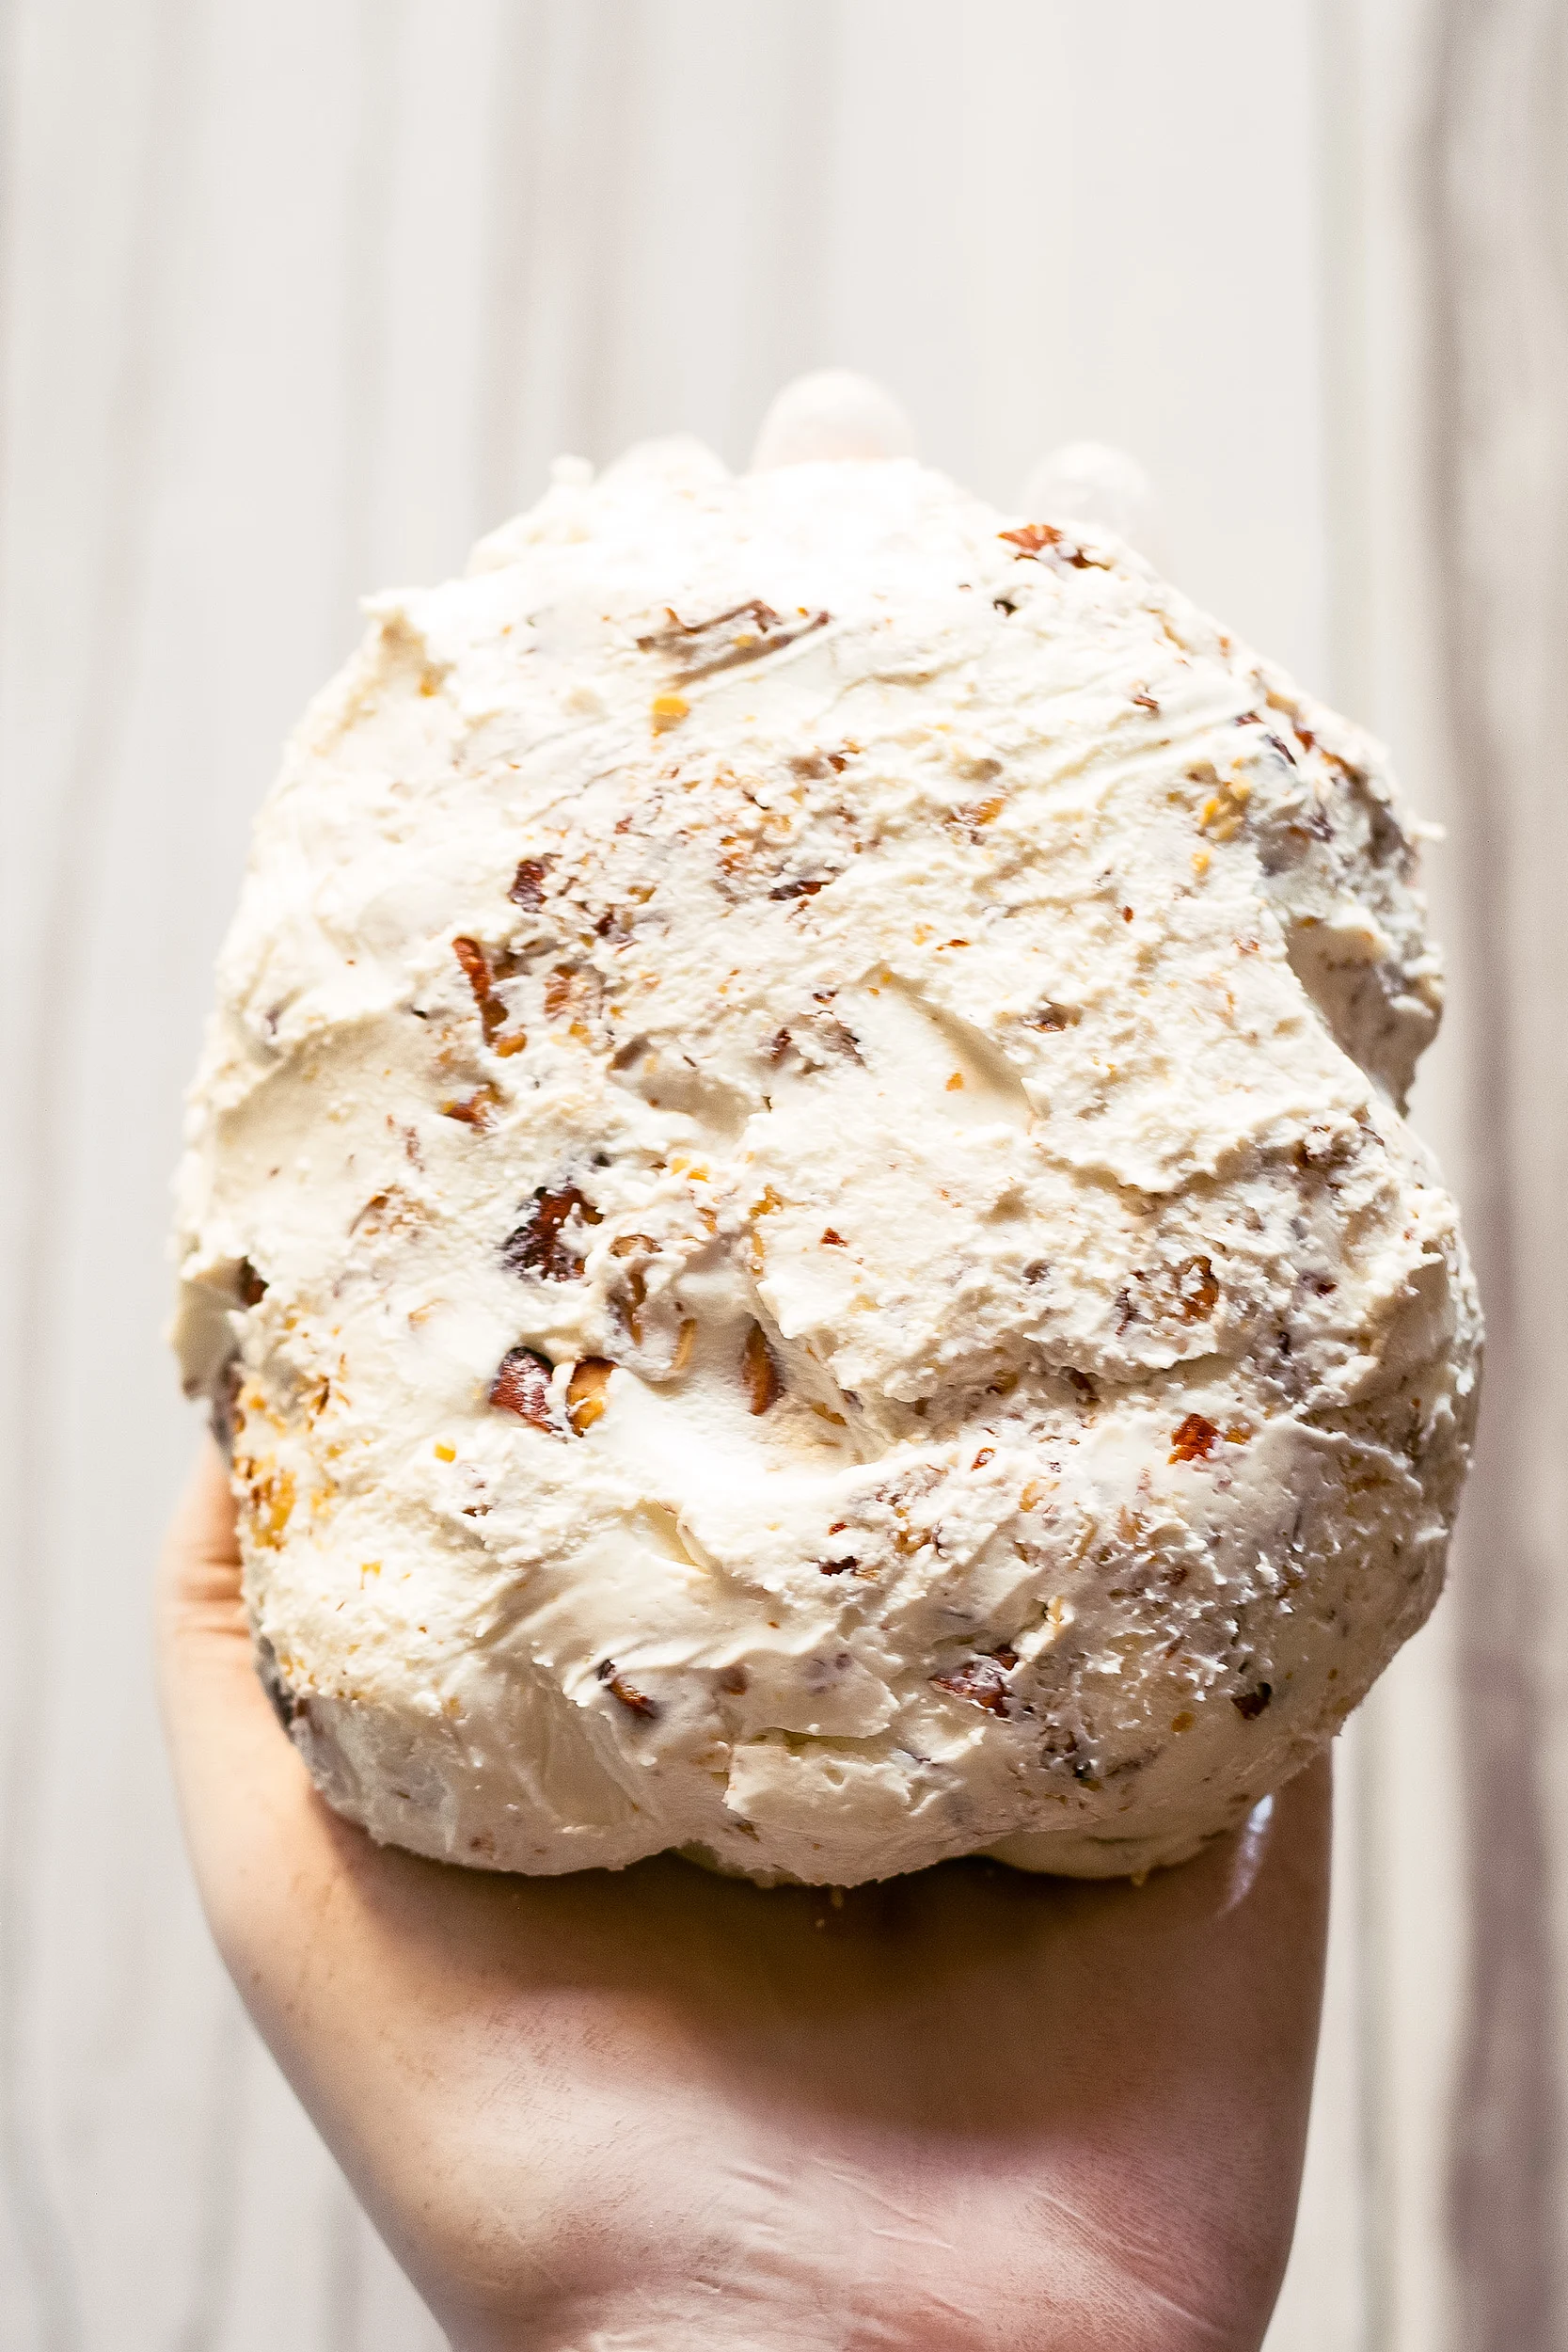 goat cheese ball with almonds in the palm of a hand